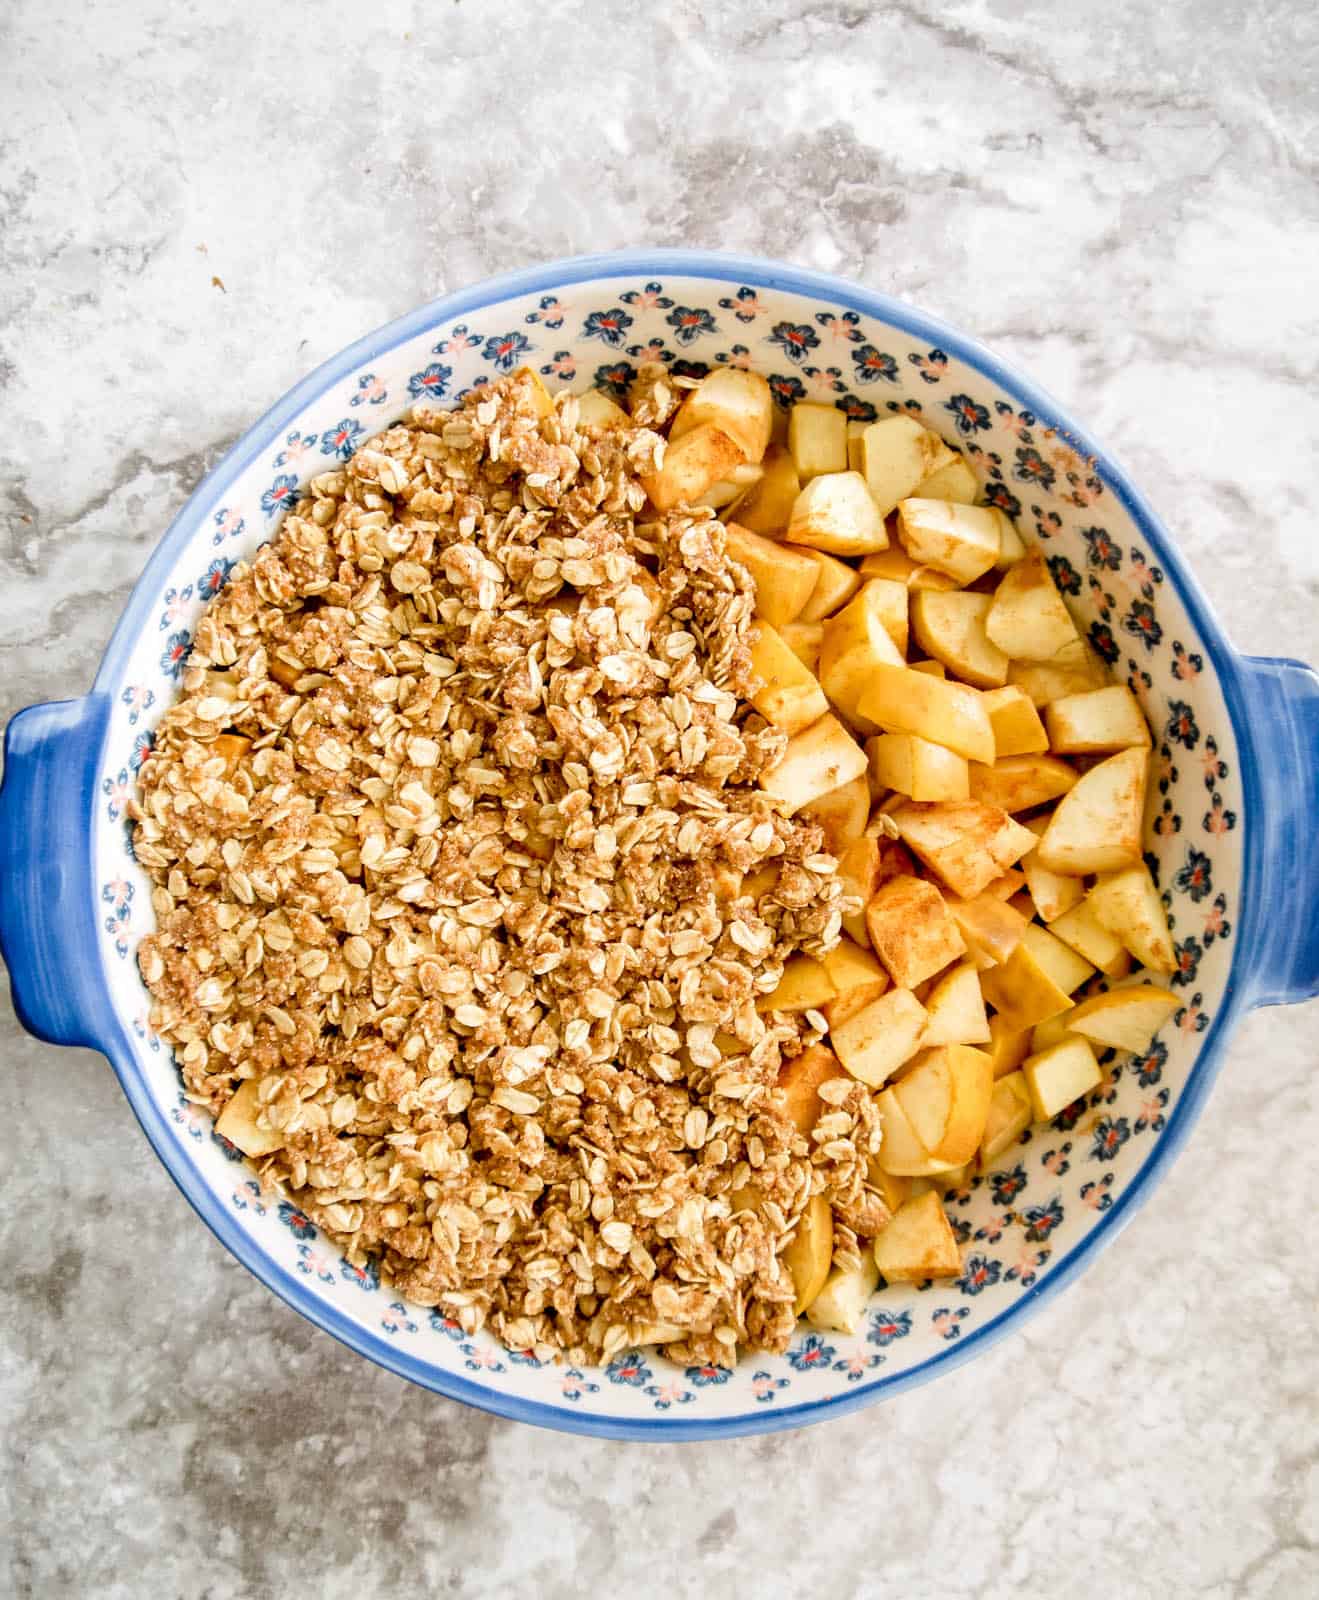 Almond and oat topping on top of pre-baked apples.